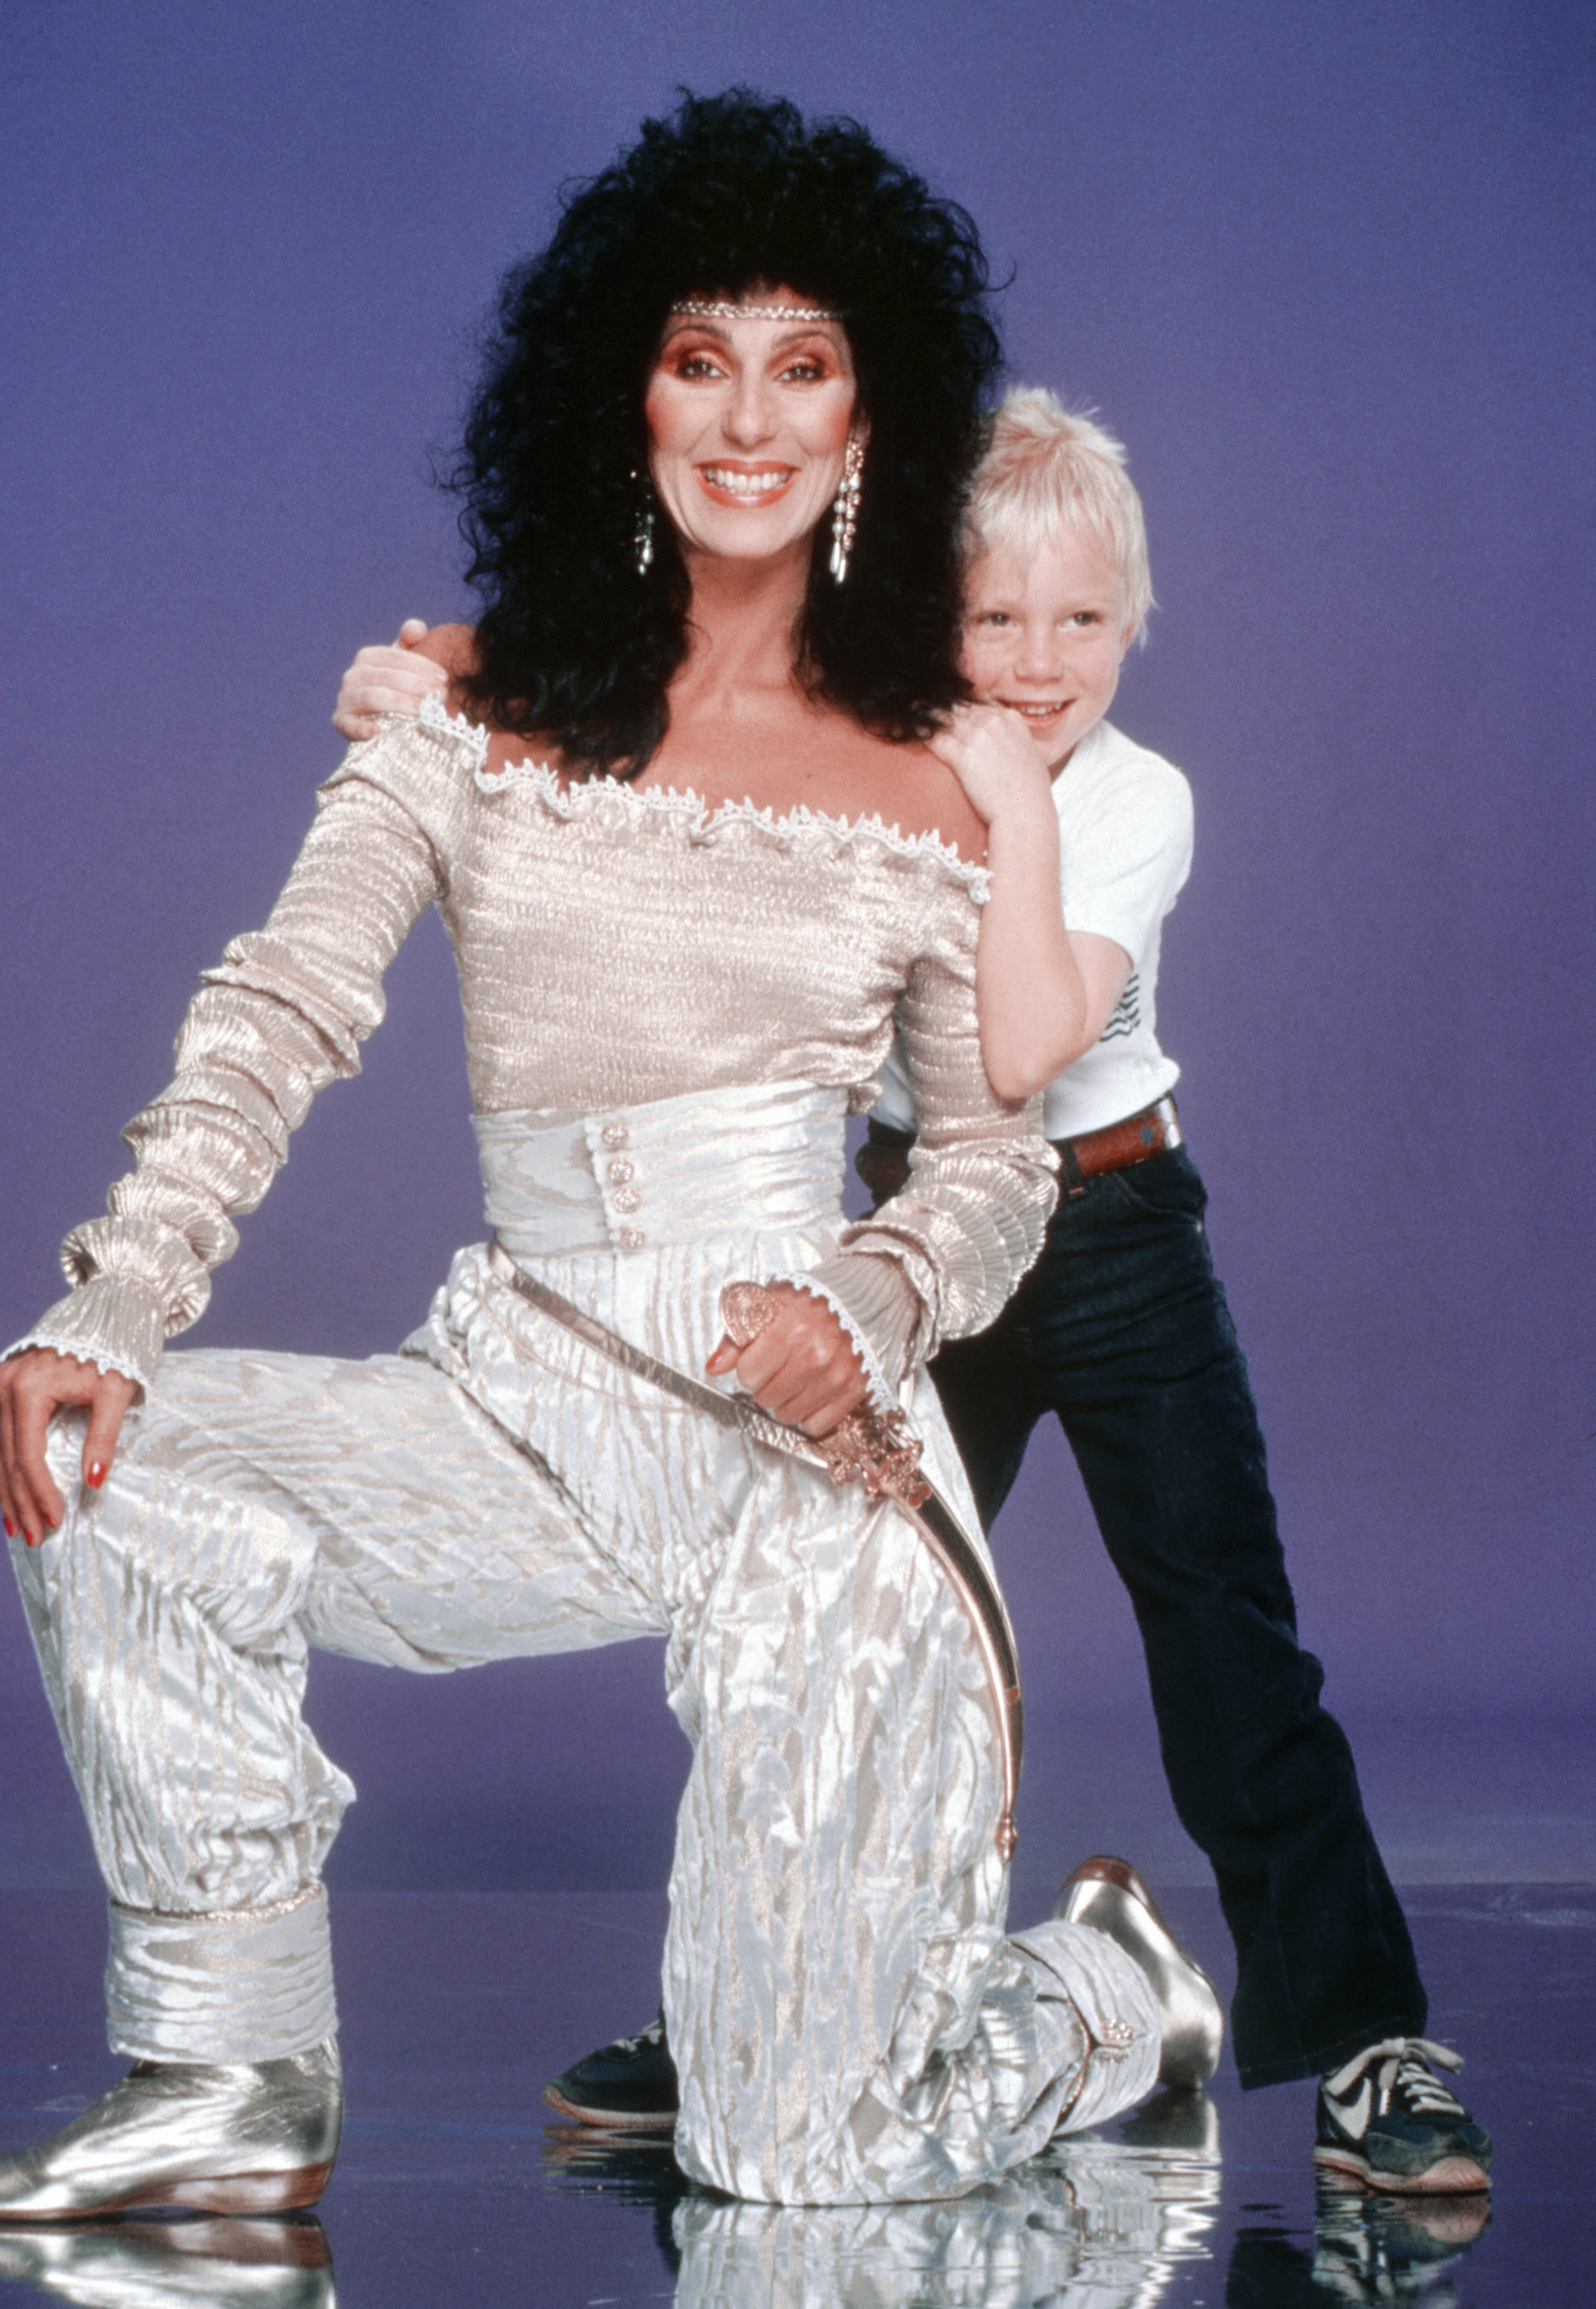 Cher and her son posing for a picture in Los Angeles, California in 1980. | Source: Getty Images